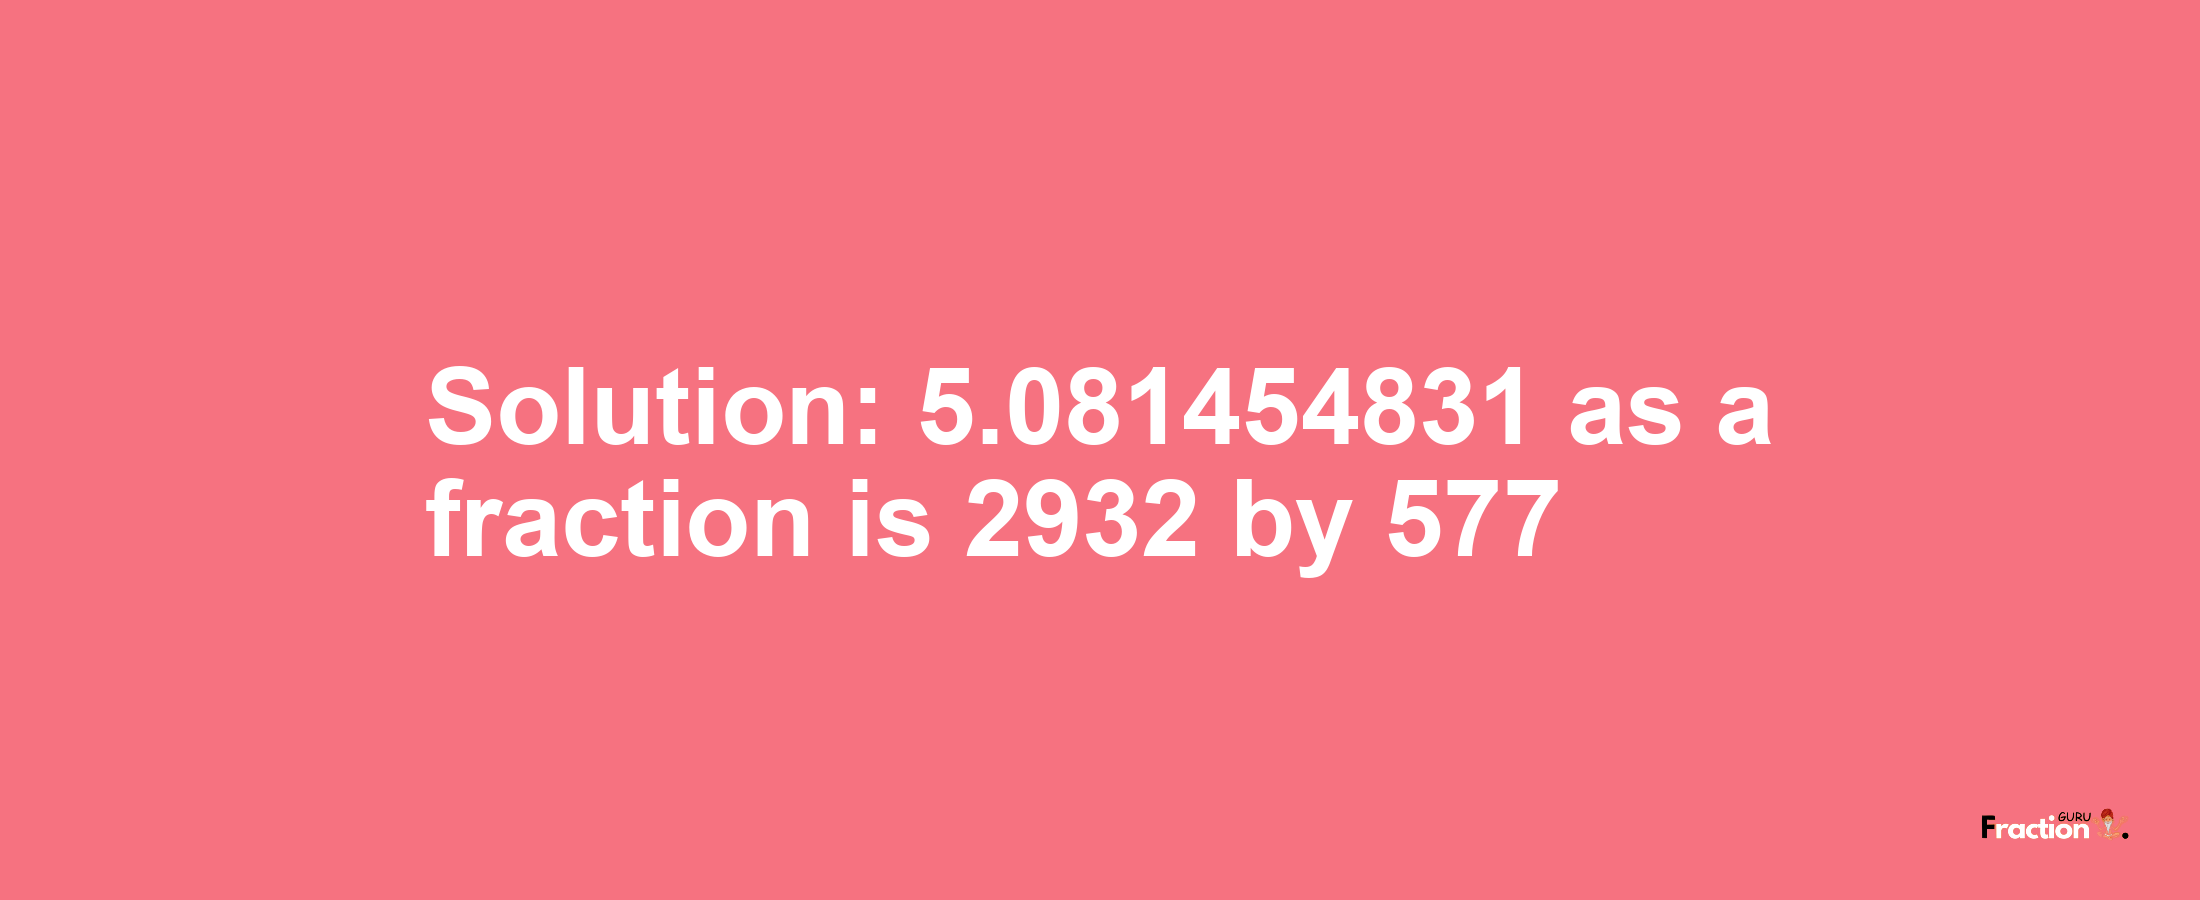 Solution:5.081454831 as a fraction is 2932/577